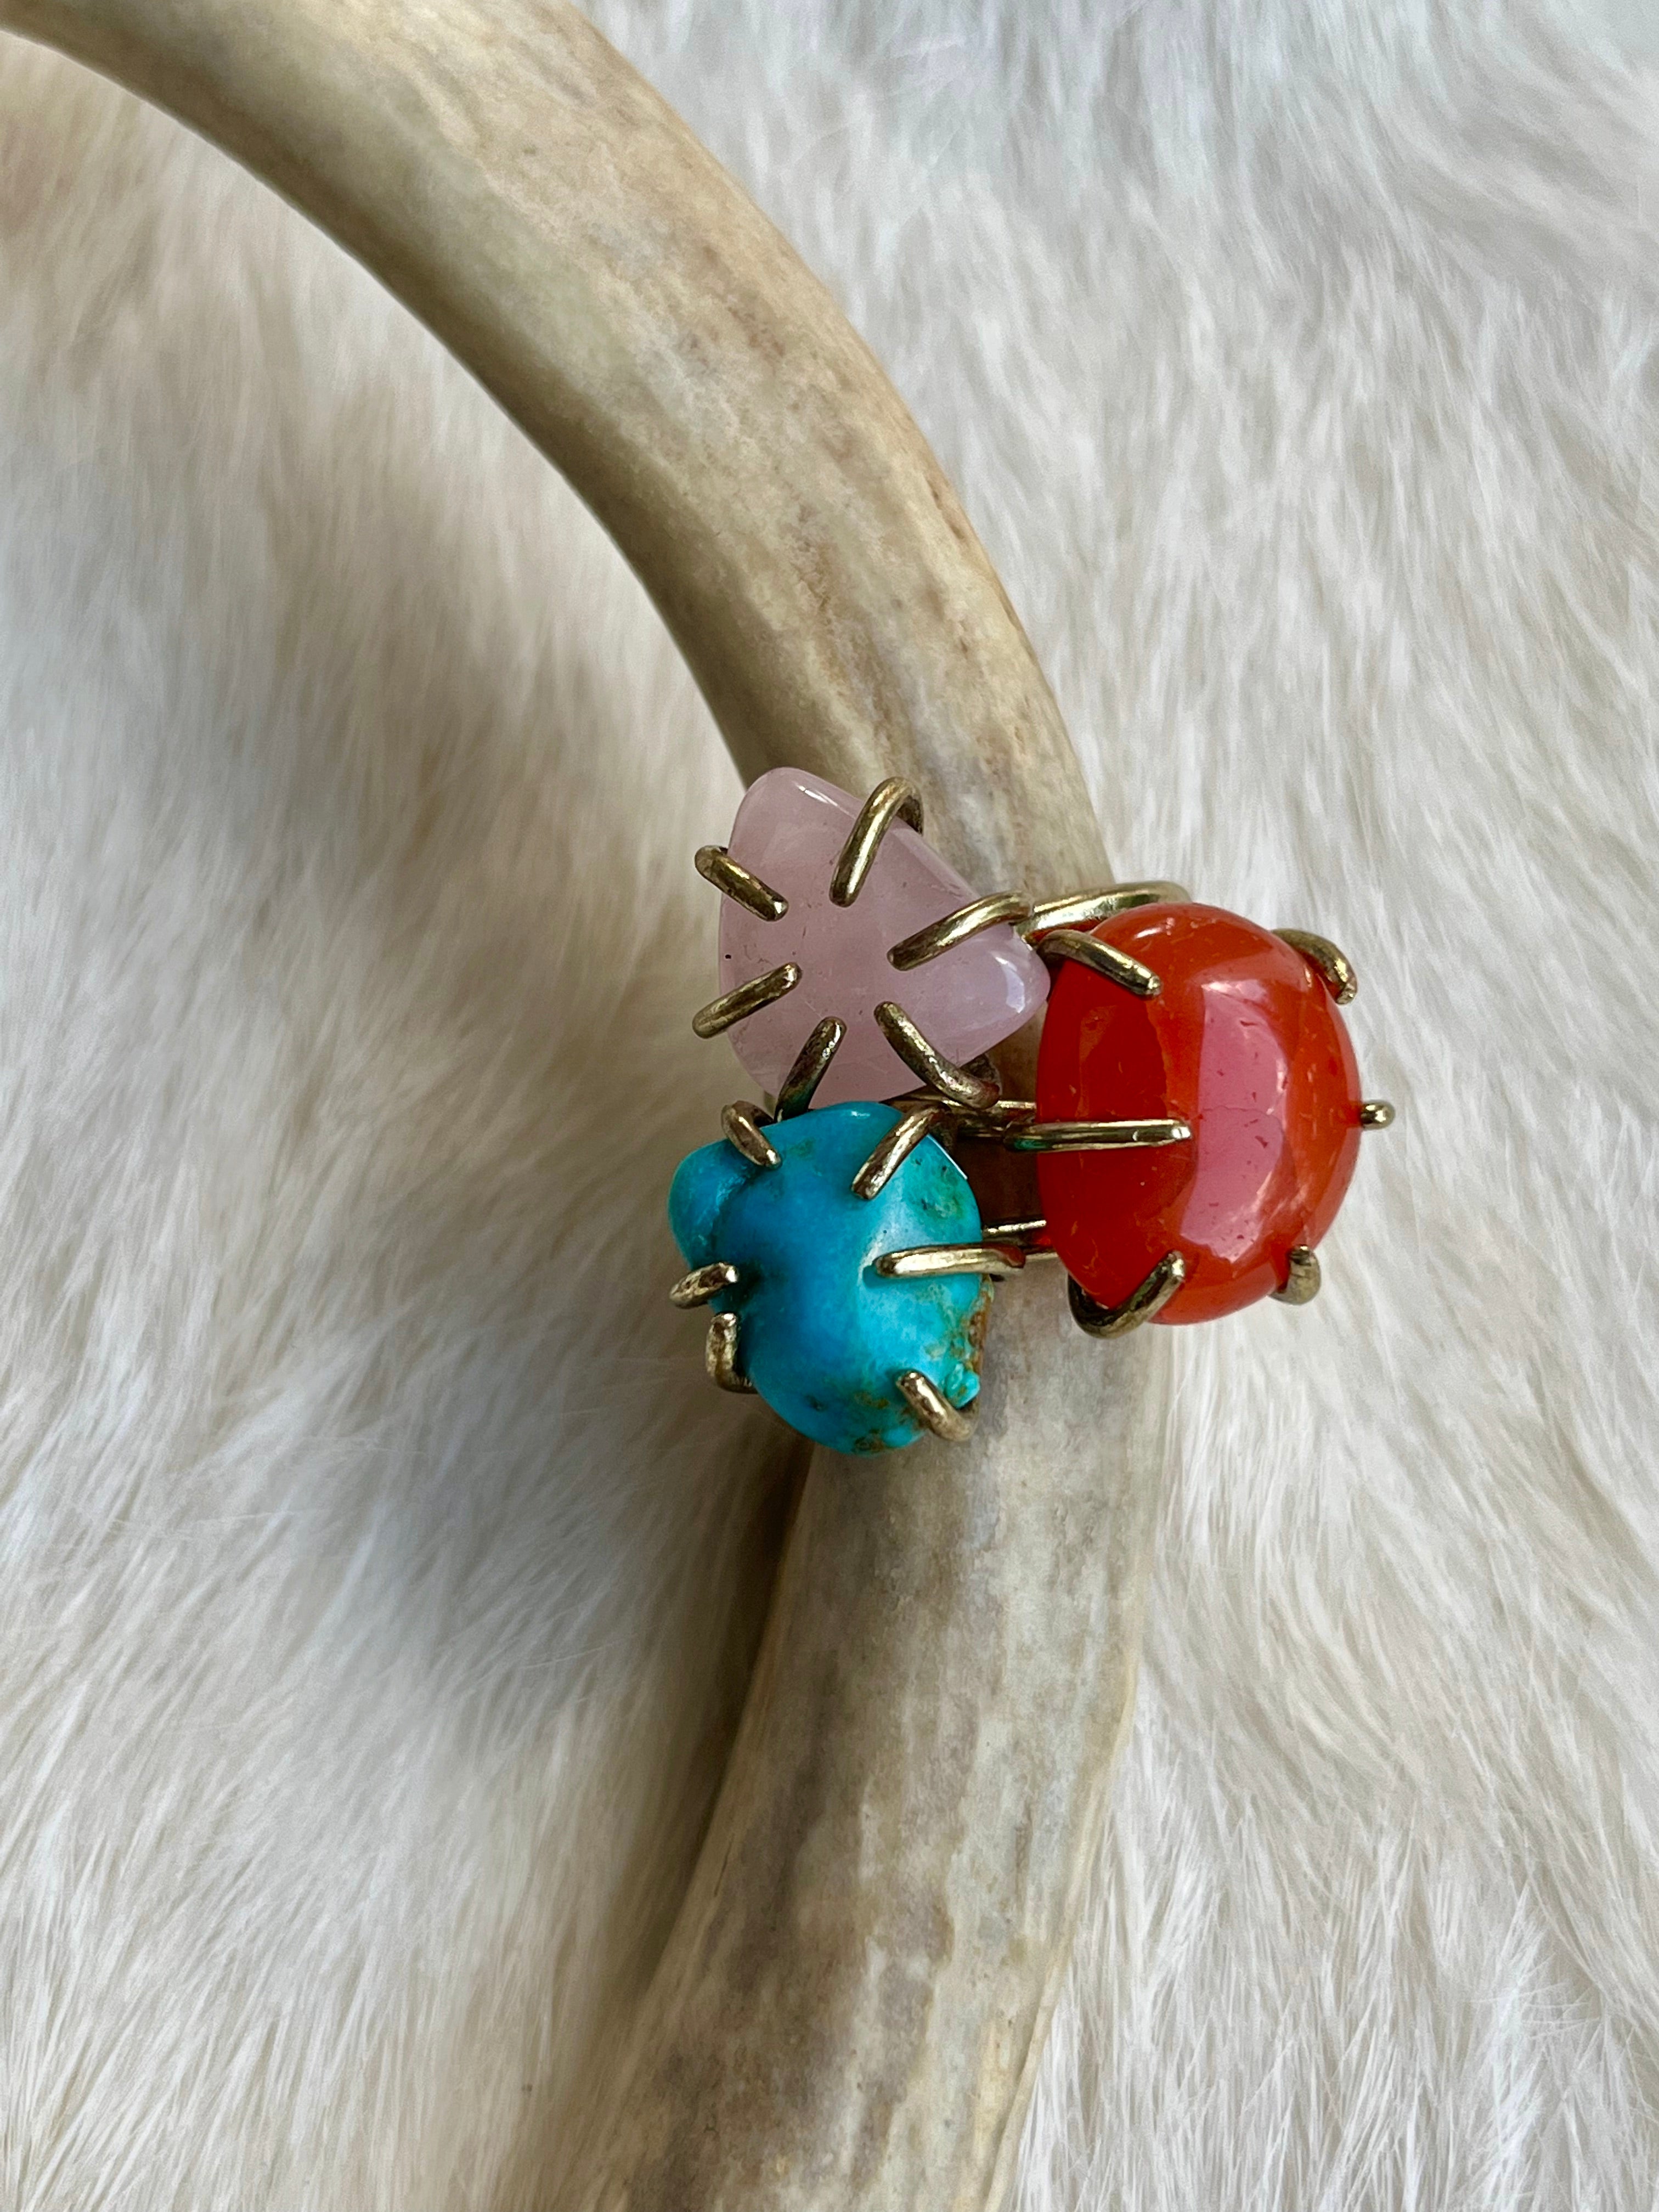 Turquoise 6 Prong Ring 1